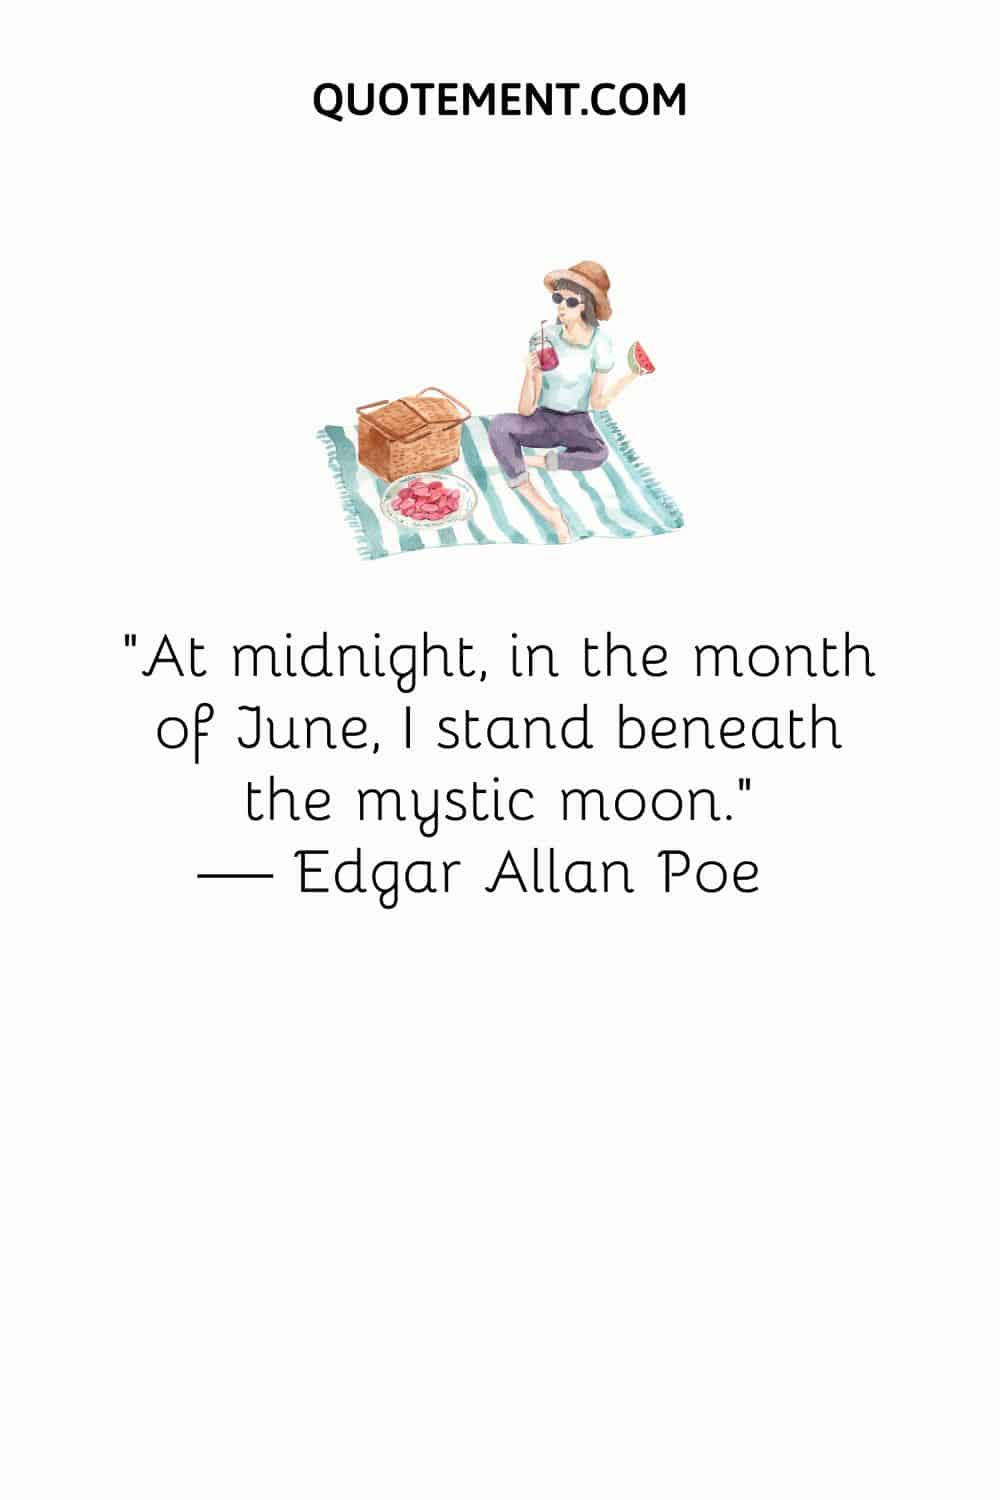 “At midnight, in the month of June, I stand beneath the mystic moon.” — Edgar Allan Poe